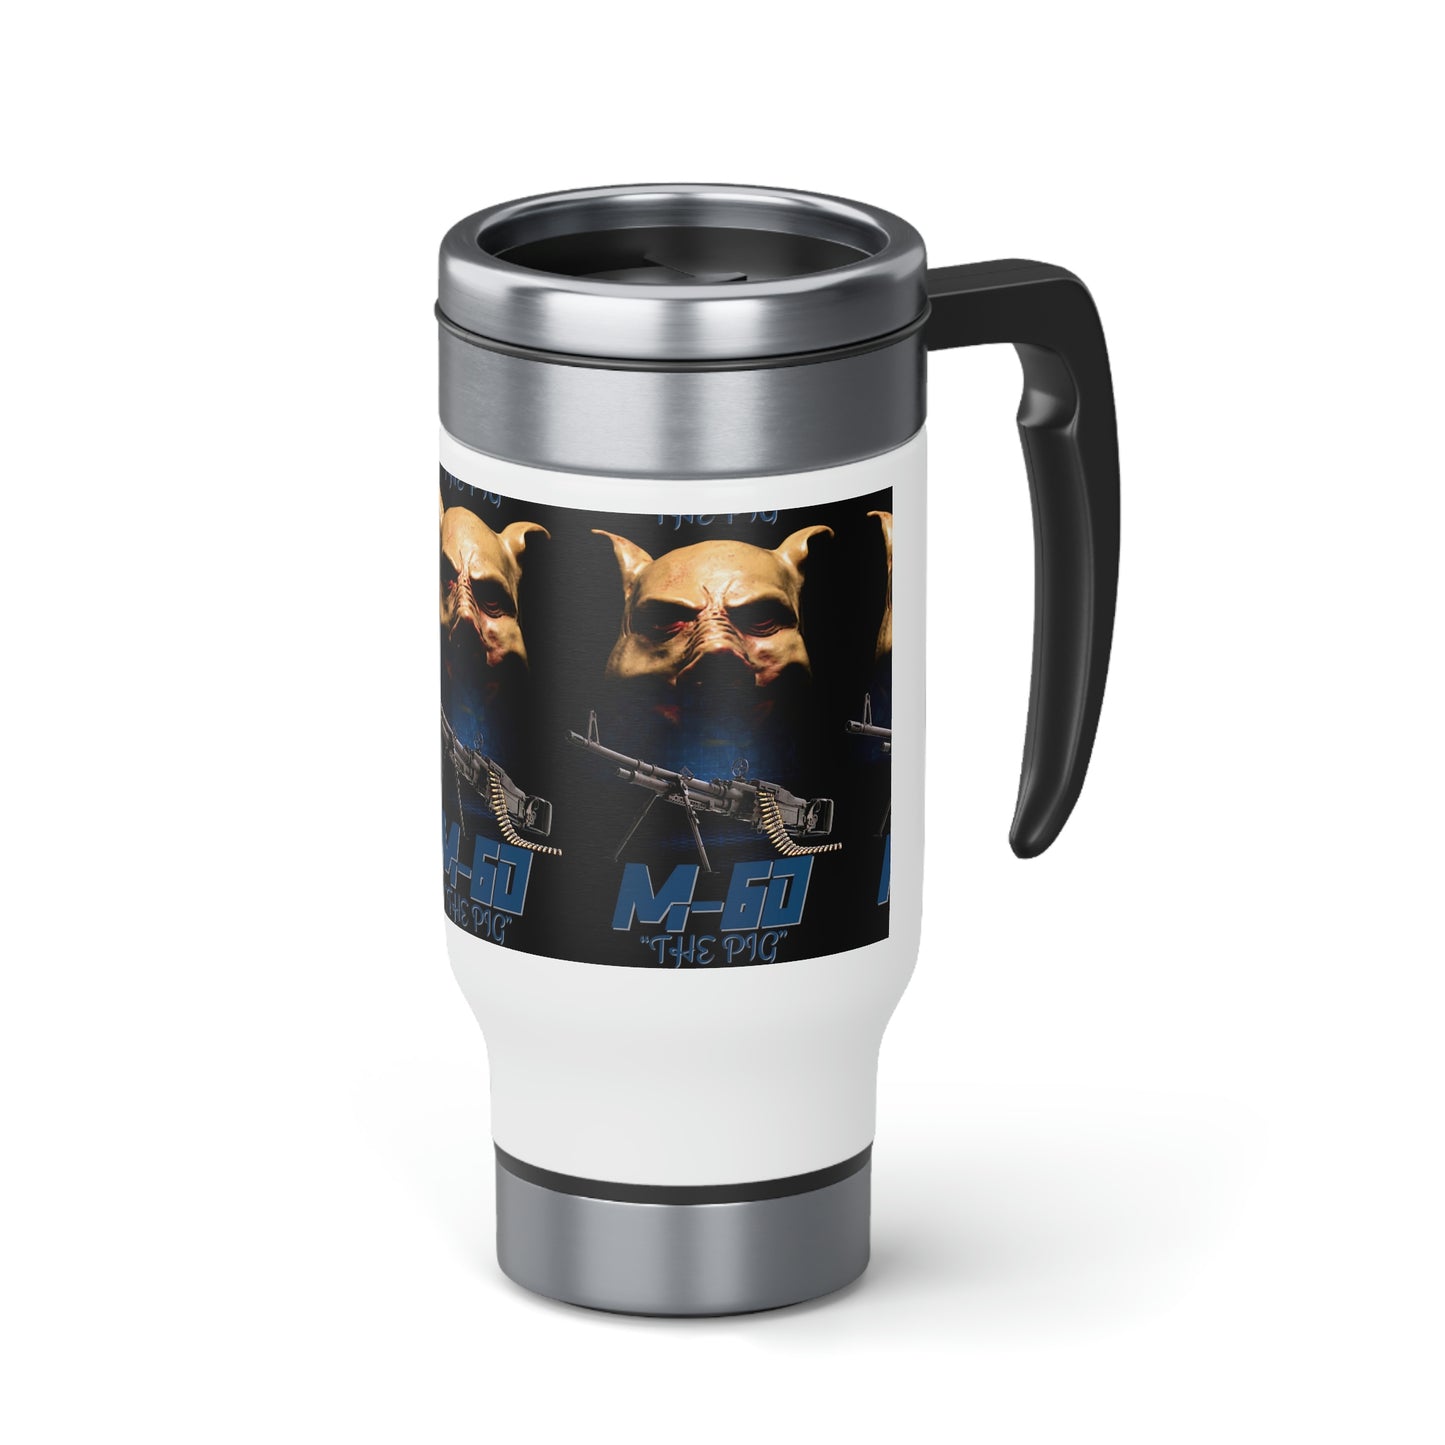 M-60 The Pig Stainless Steel Travel Mug with Handle, 14oz